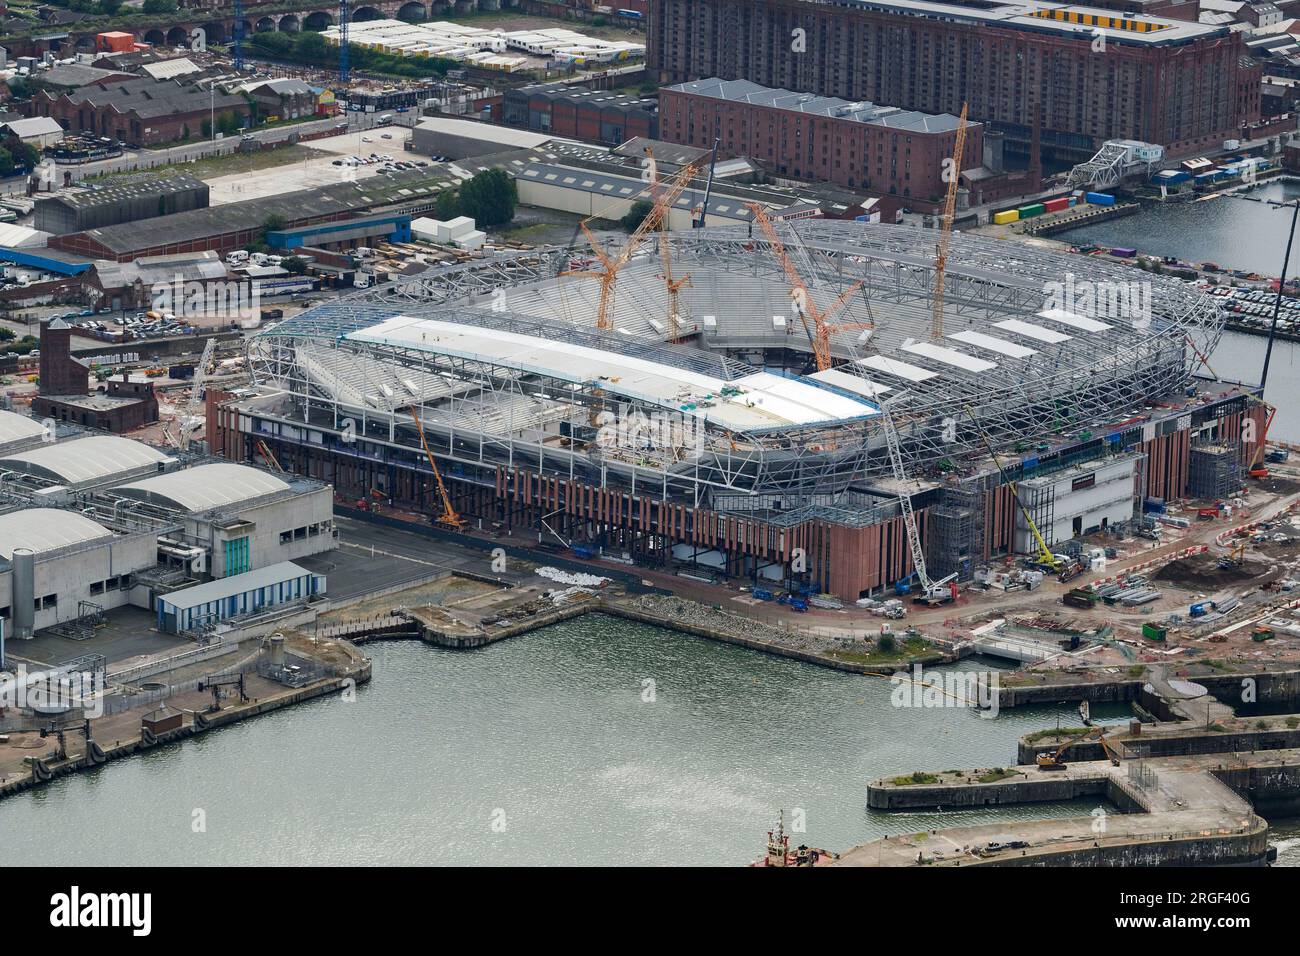 An aerial view of Everton FC new stadium under construction, Bramley-Moore Dock, Merseyside, North West England, UK Stock Photo